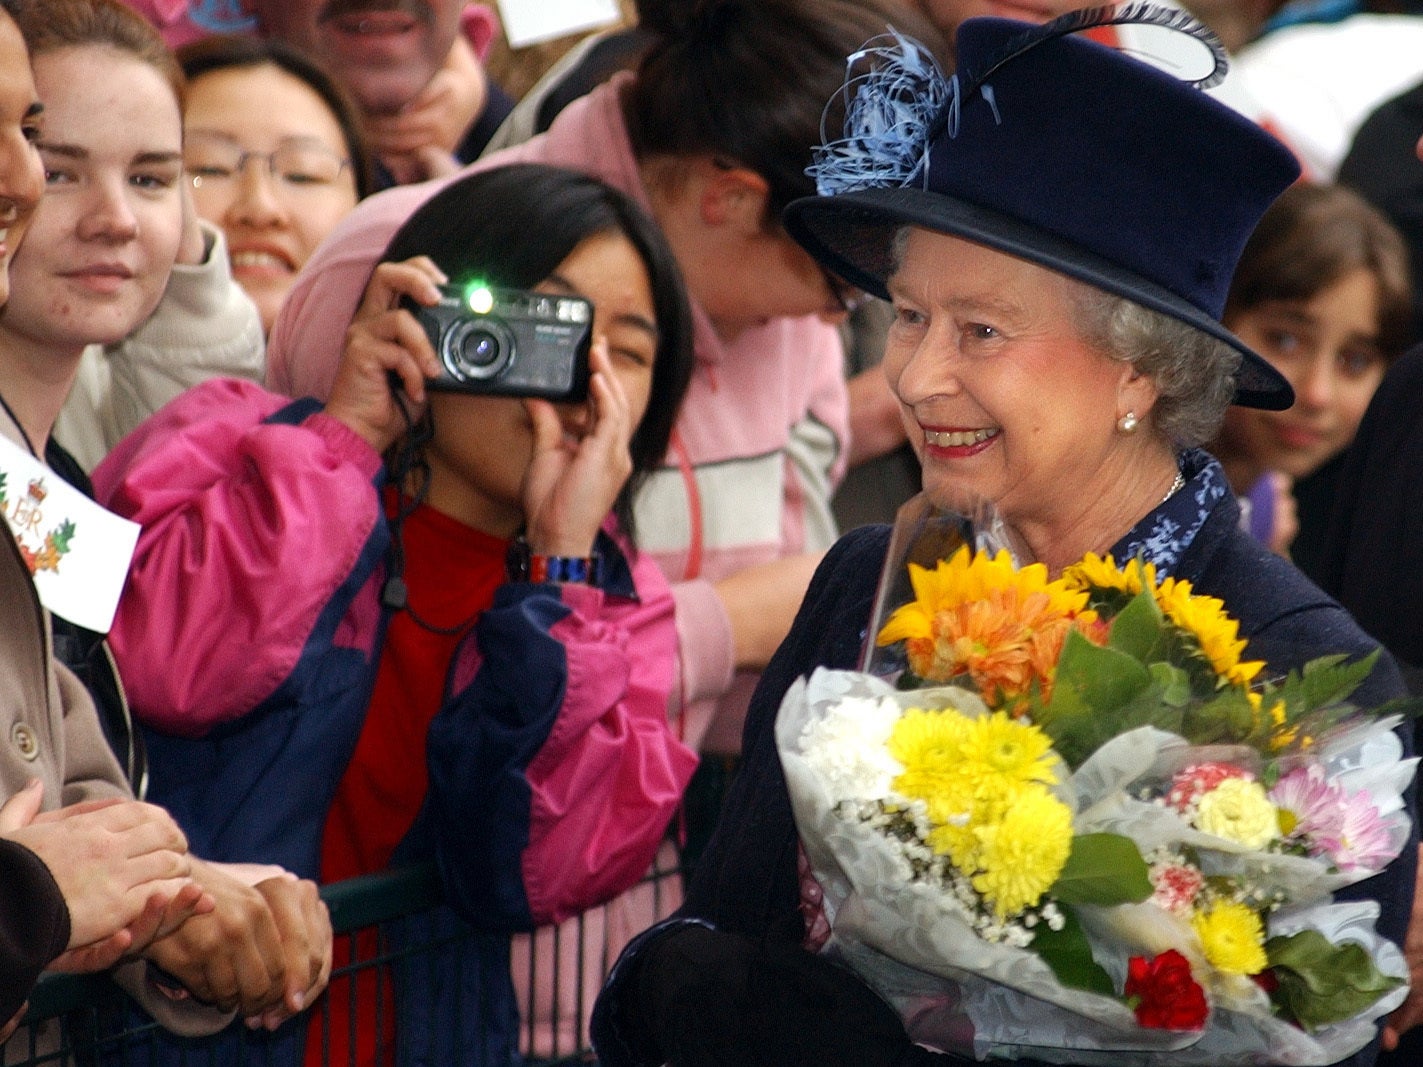 Queen Elizabeth II meeting wellwishers during a walkabout at the University of British Columbia in Canada in 2002